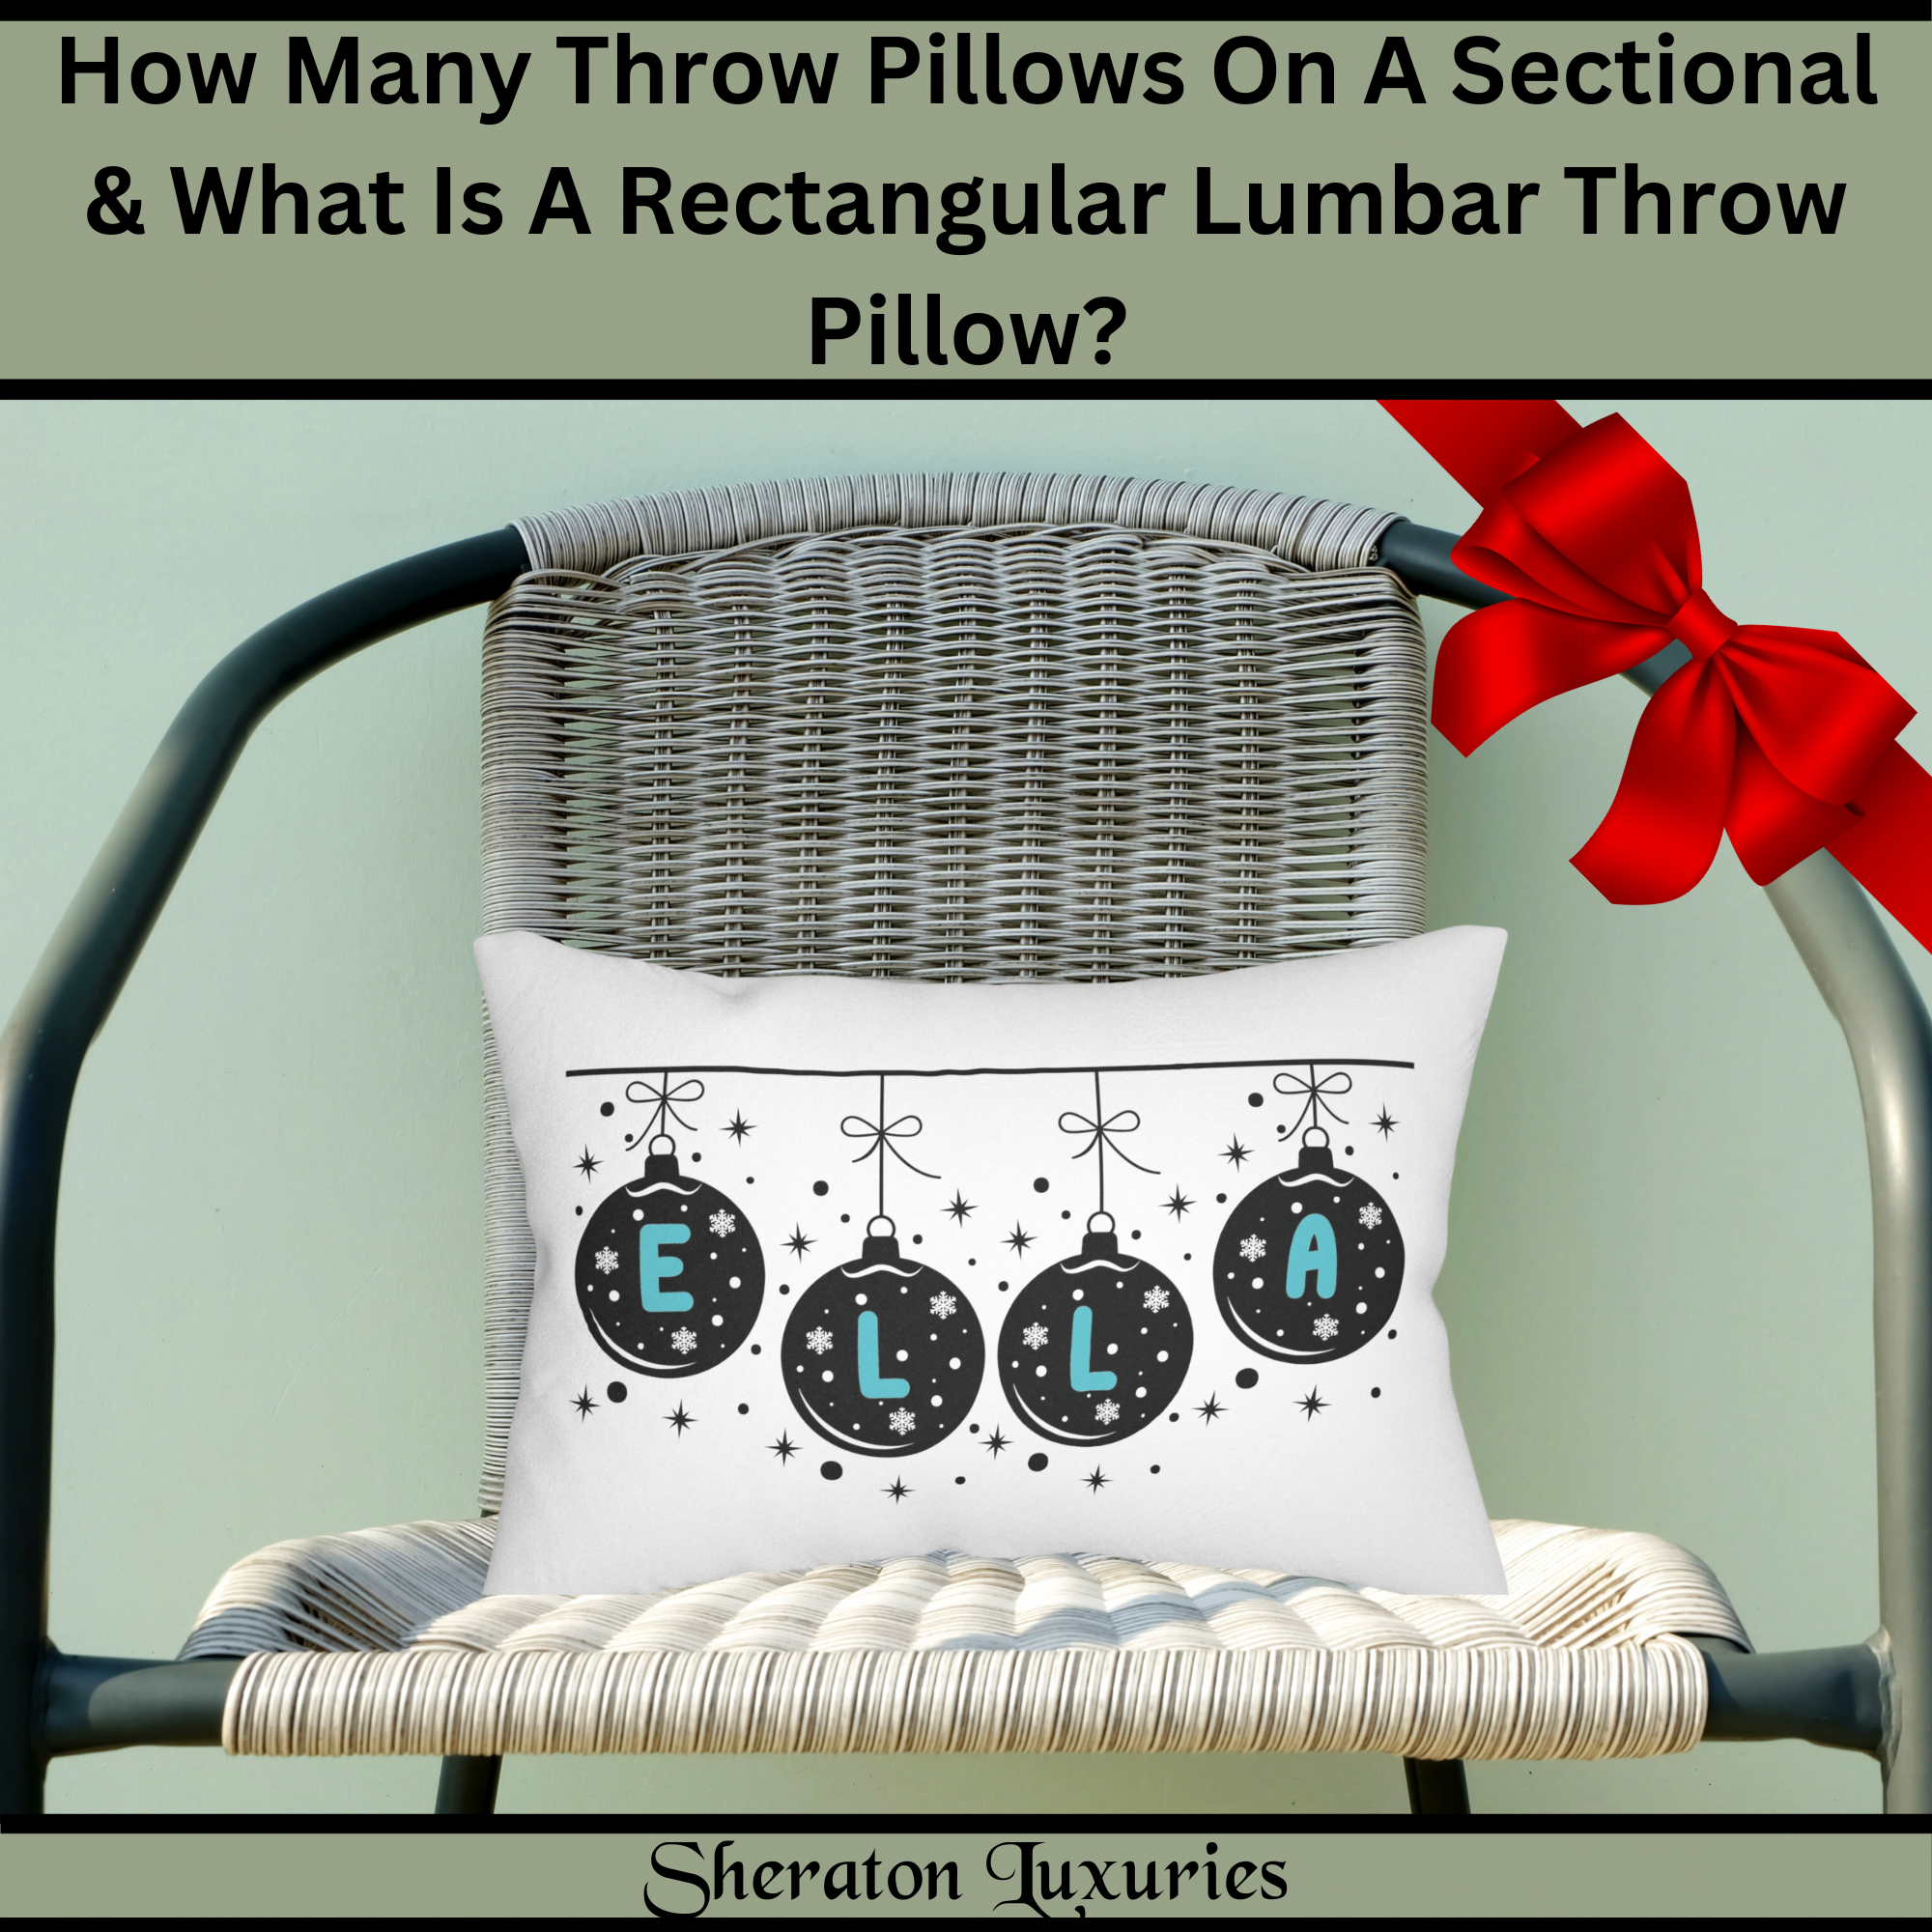 How Many Throw Pillows Should You Put on Your Sectional